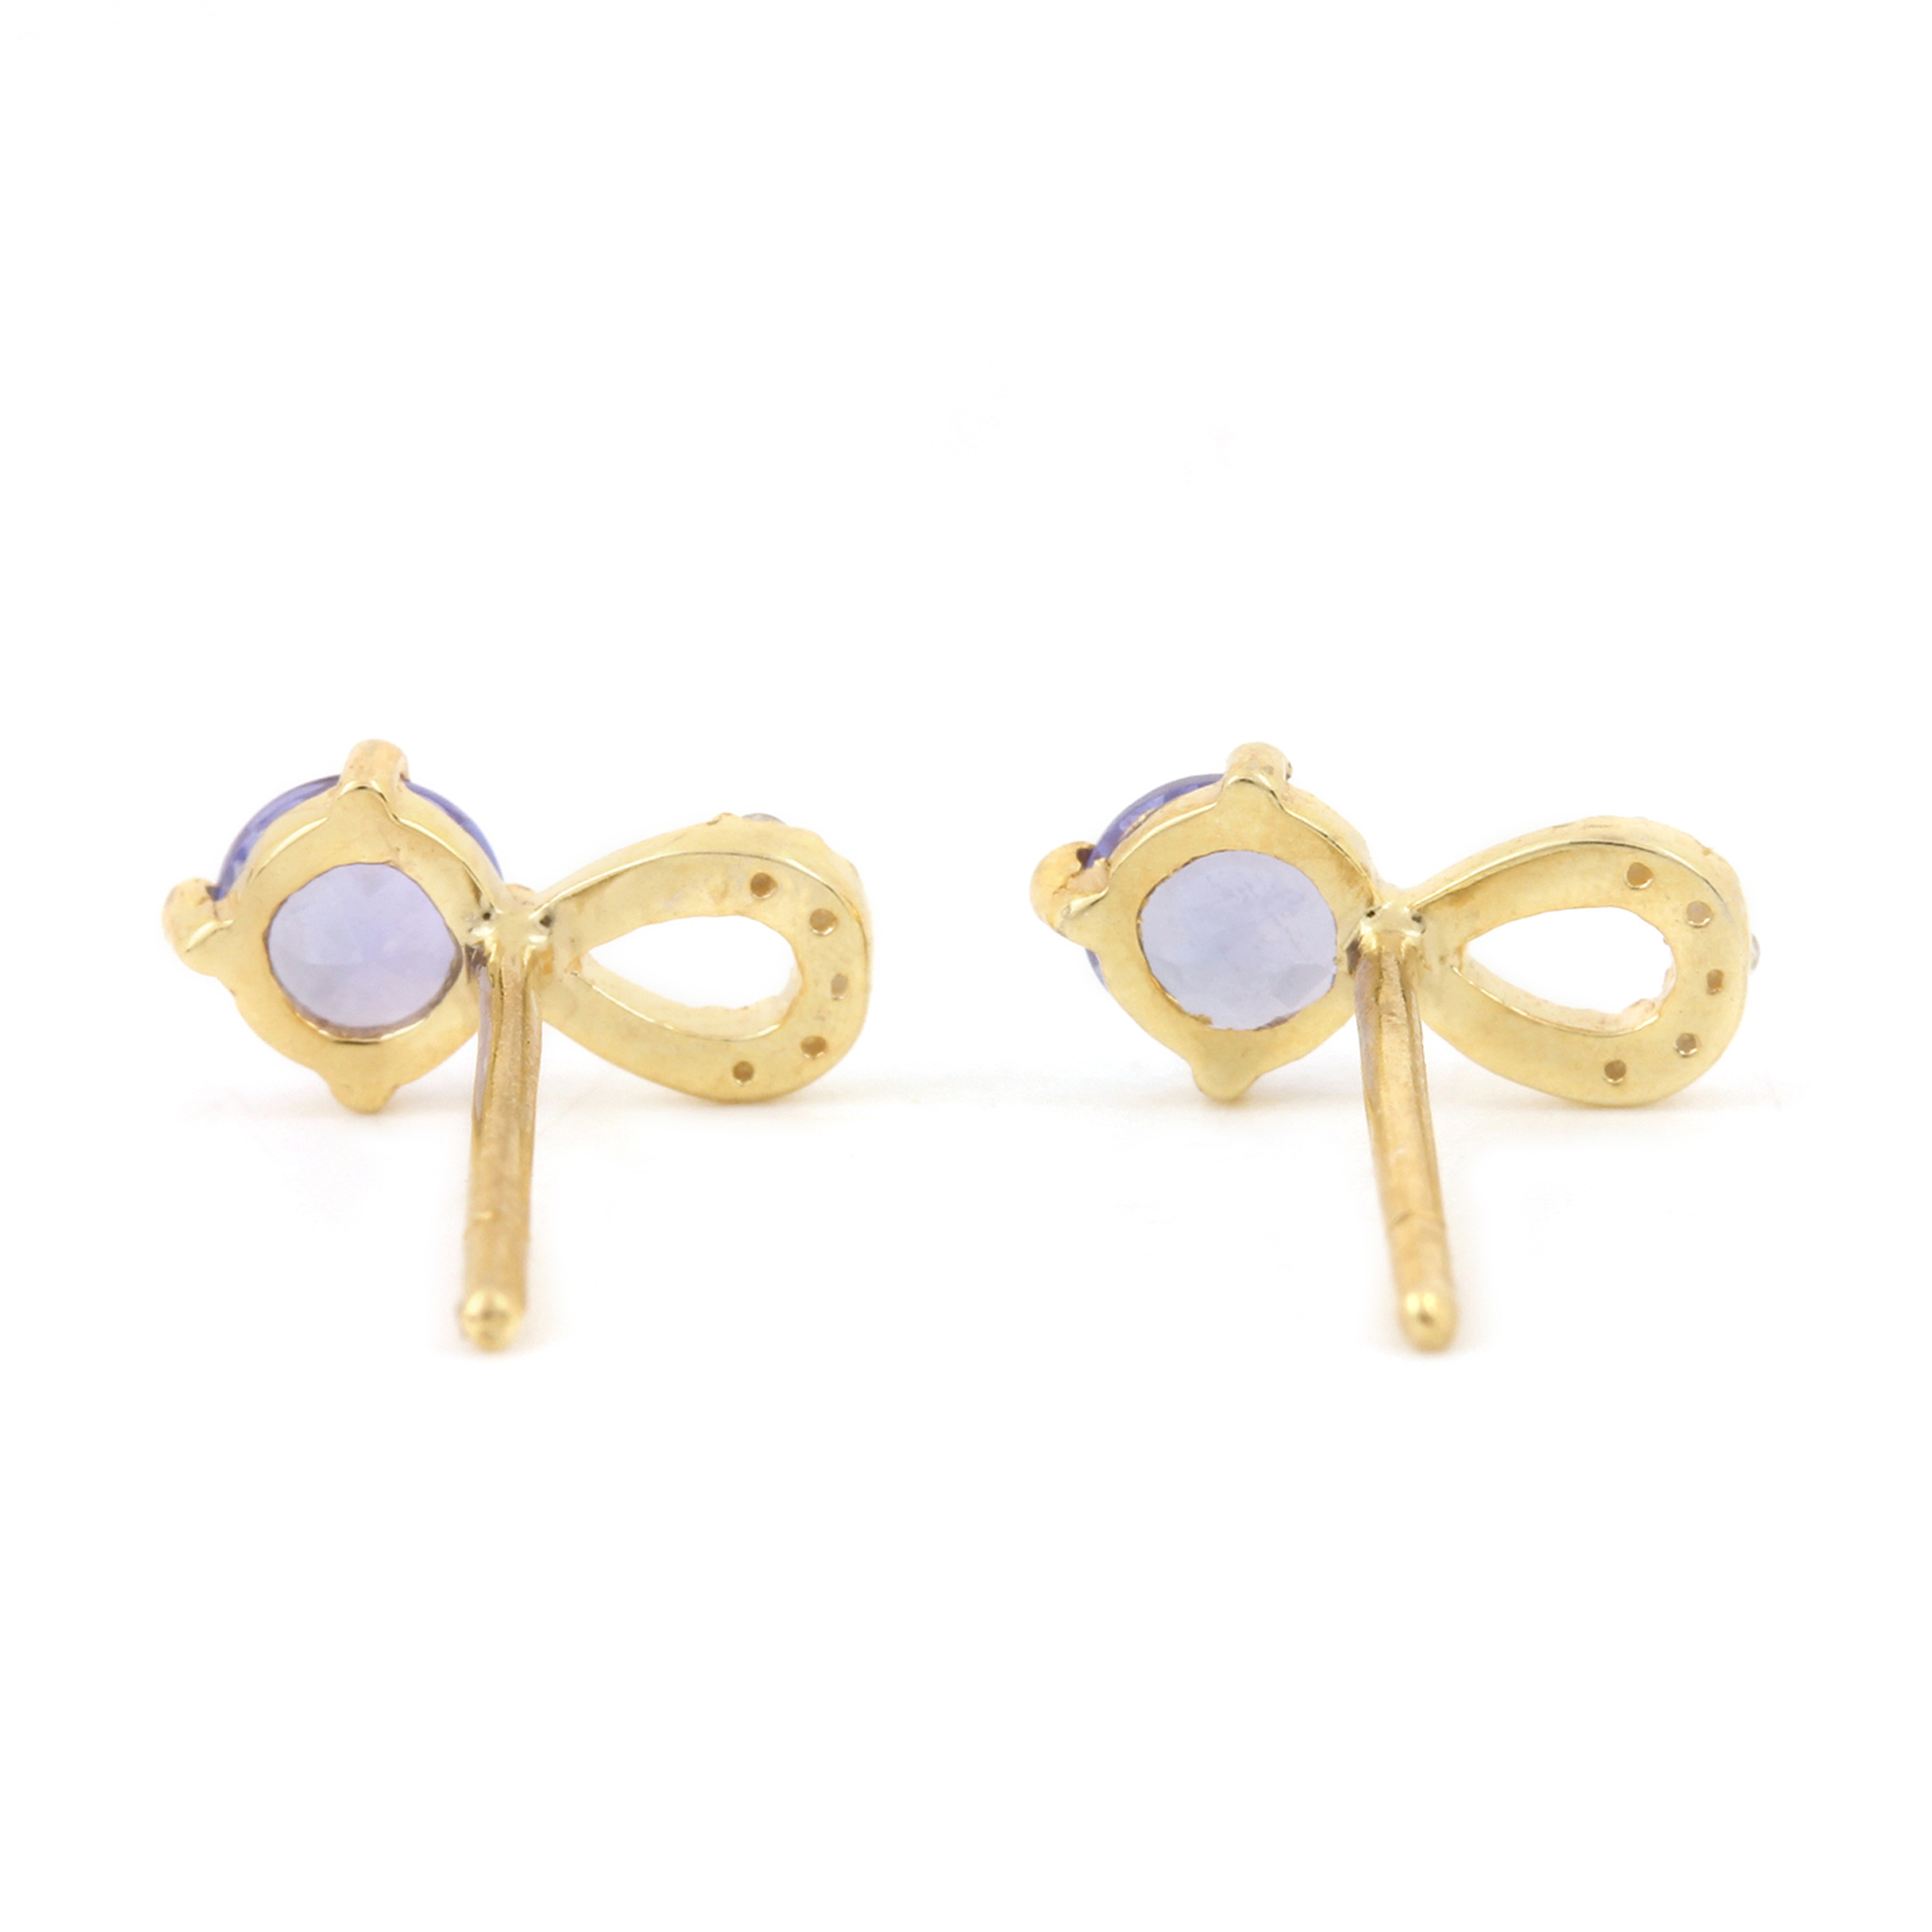 Solid 14k Gold Stud Earrings Adorned With Diamond &Tanzanite